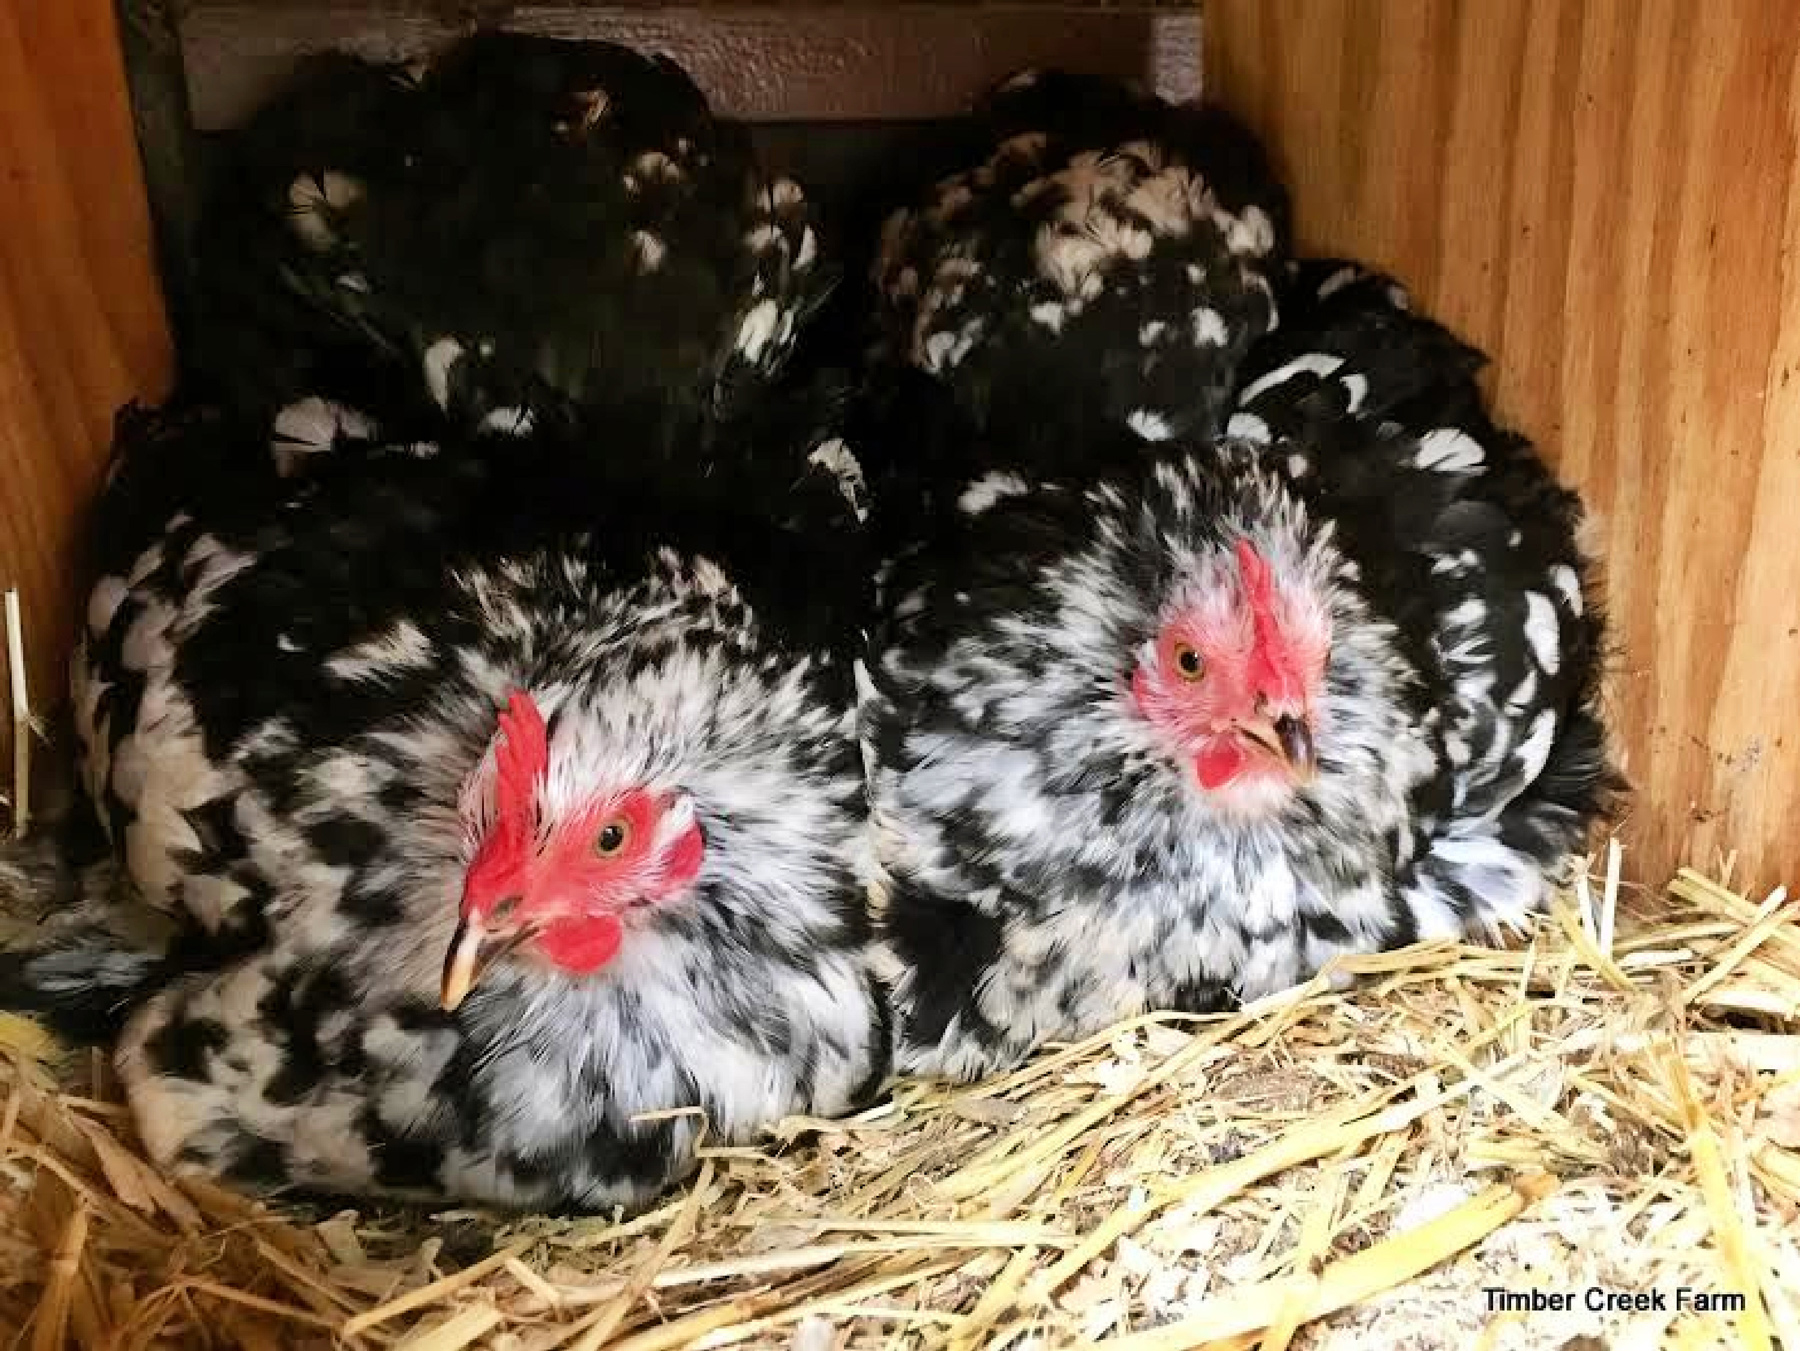 McMurray Hatchery Blog | The Beauty of Bantam Chickens | Mottled Cochin